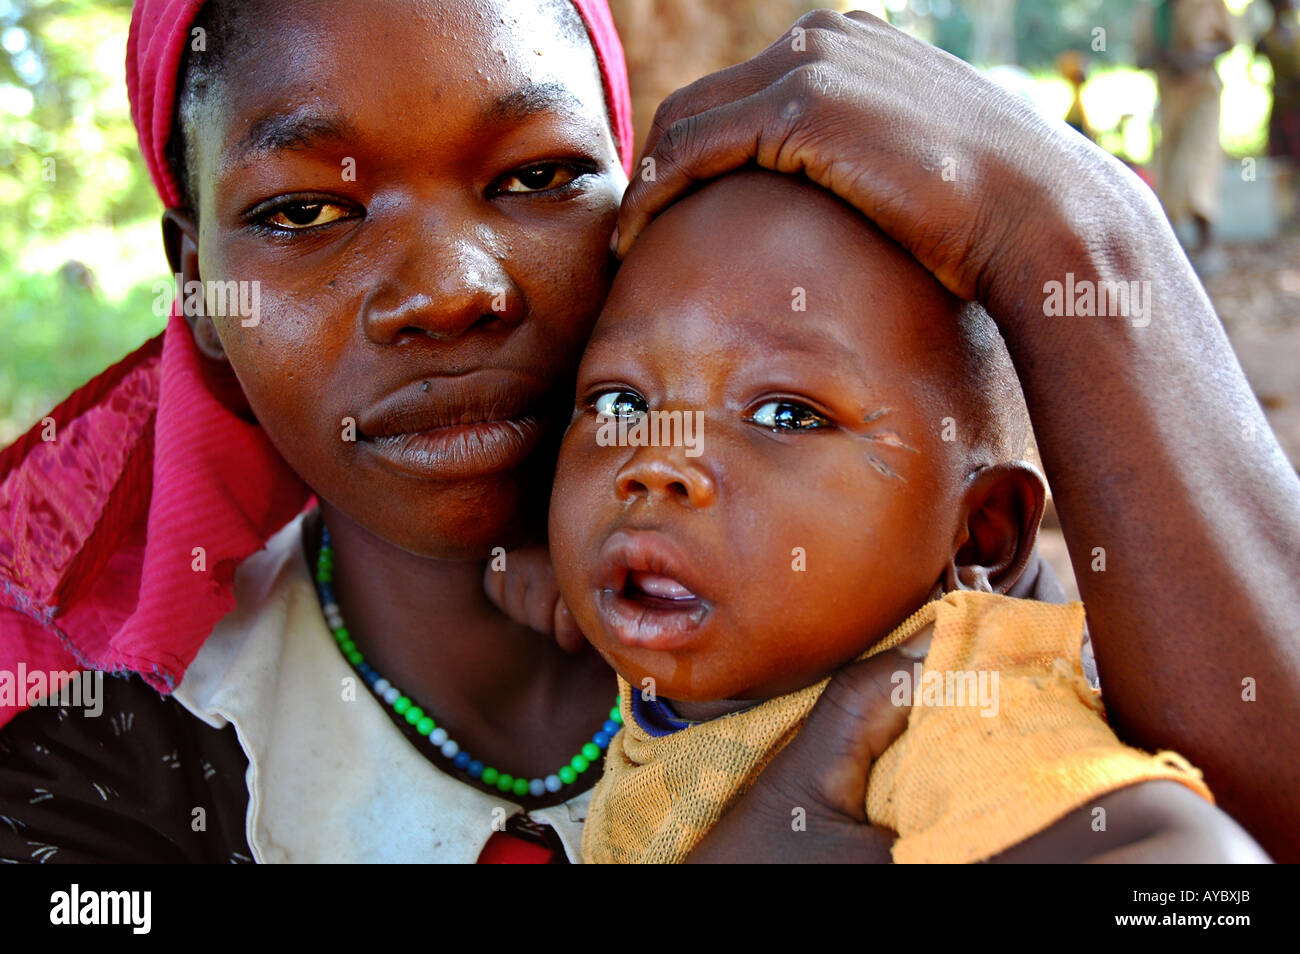 The Scars in the face have multiple uses in Sudan Most of the times indicates adulthood and clan belonging. Stock Photo